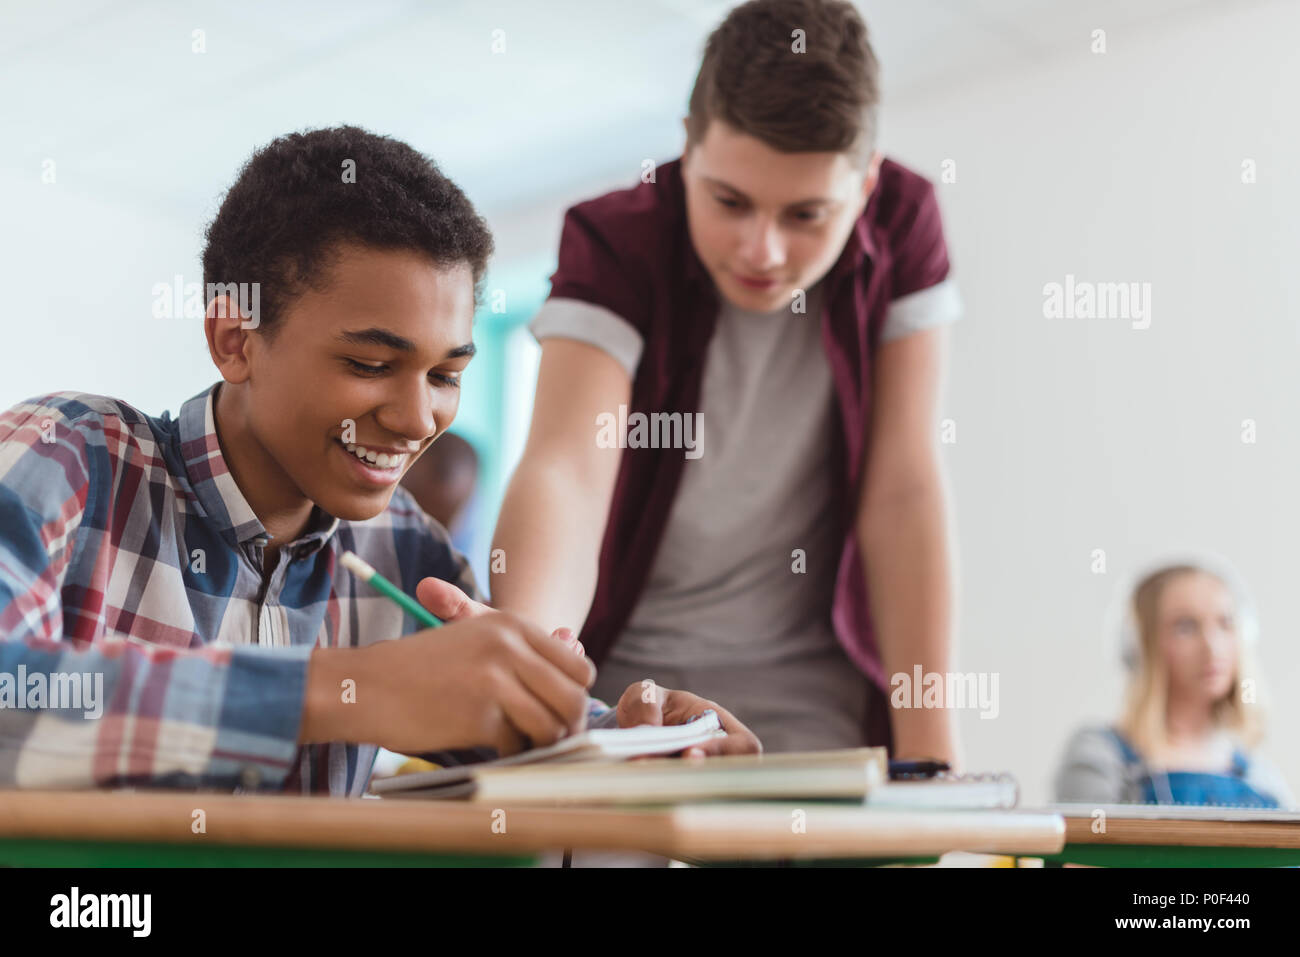 Smiling african american boy writing in textbook with classmate standing behind Stock Photo